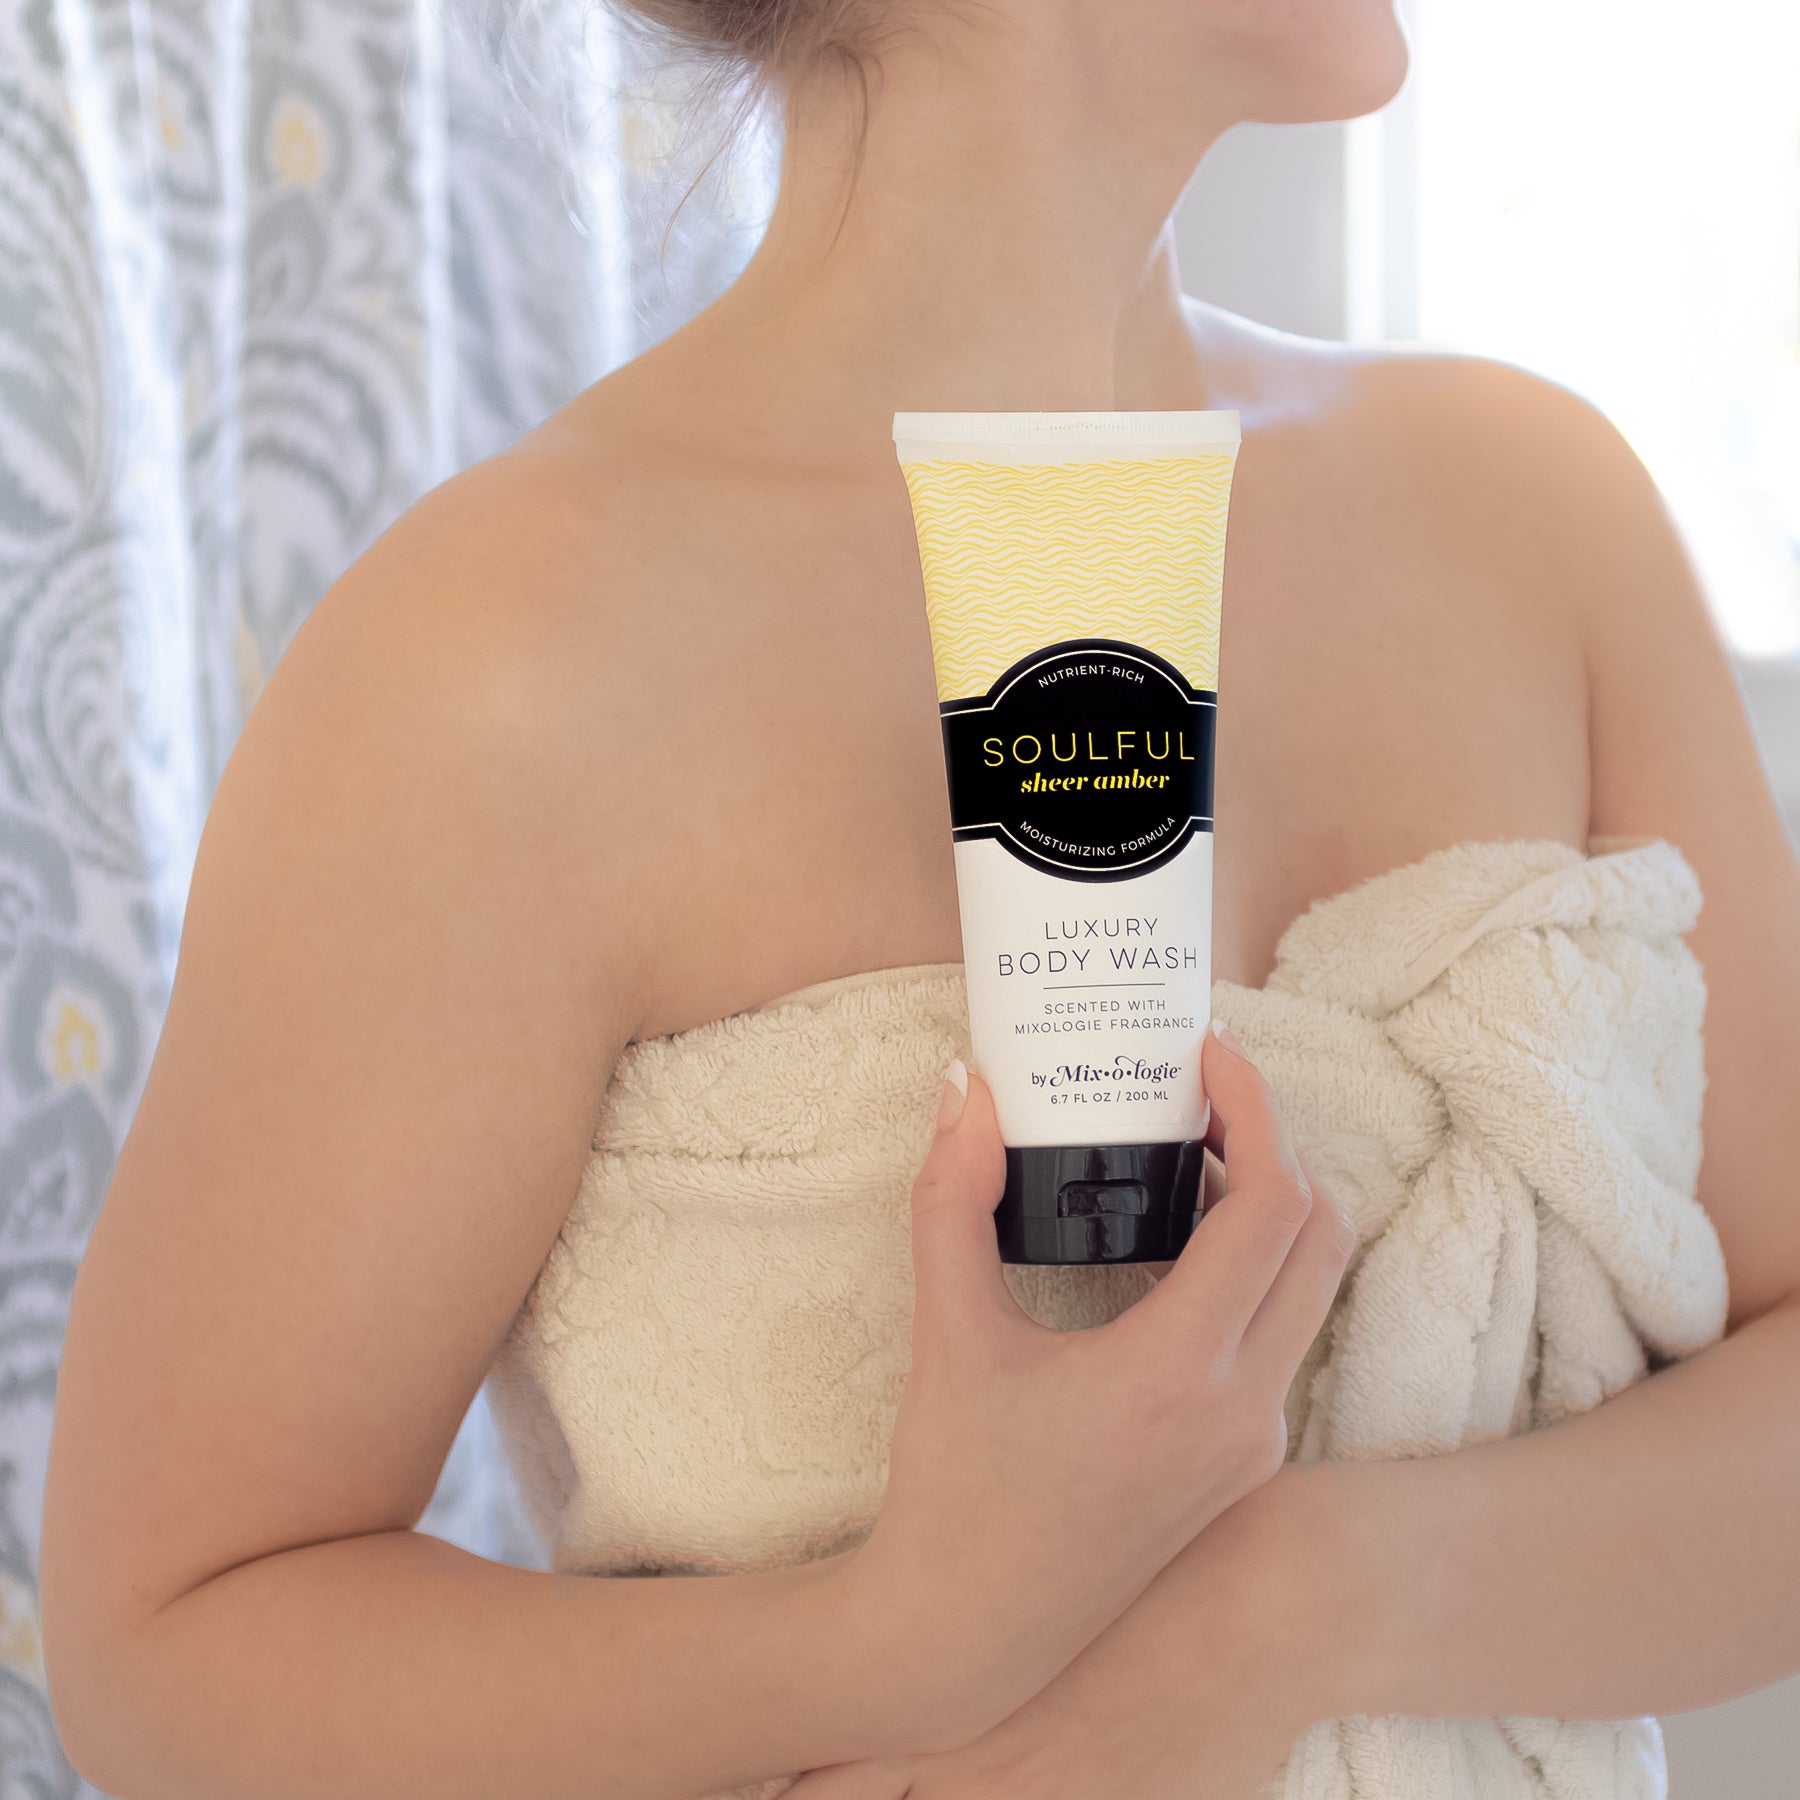 Luxury Body Wash in Mixologie’s Soulful (Sheer Amber) in bright yellow color sample package with black label. Contains 6.7 fl oz or 200 mL pictured in models hands in a bathroom.